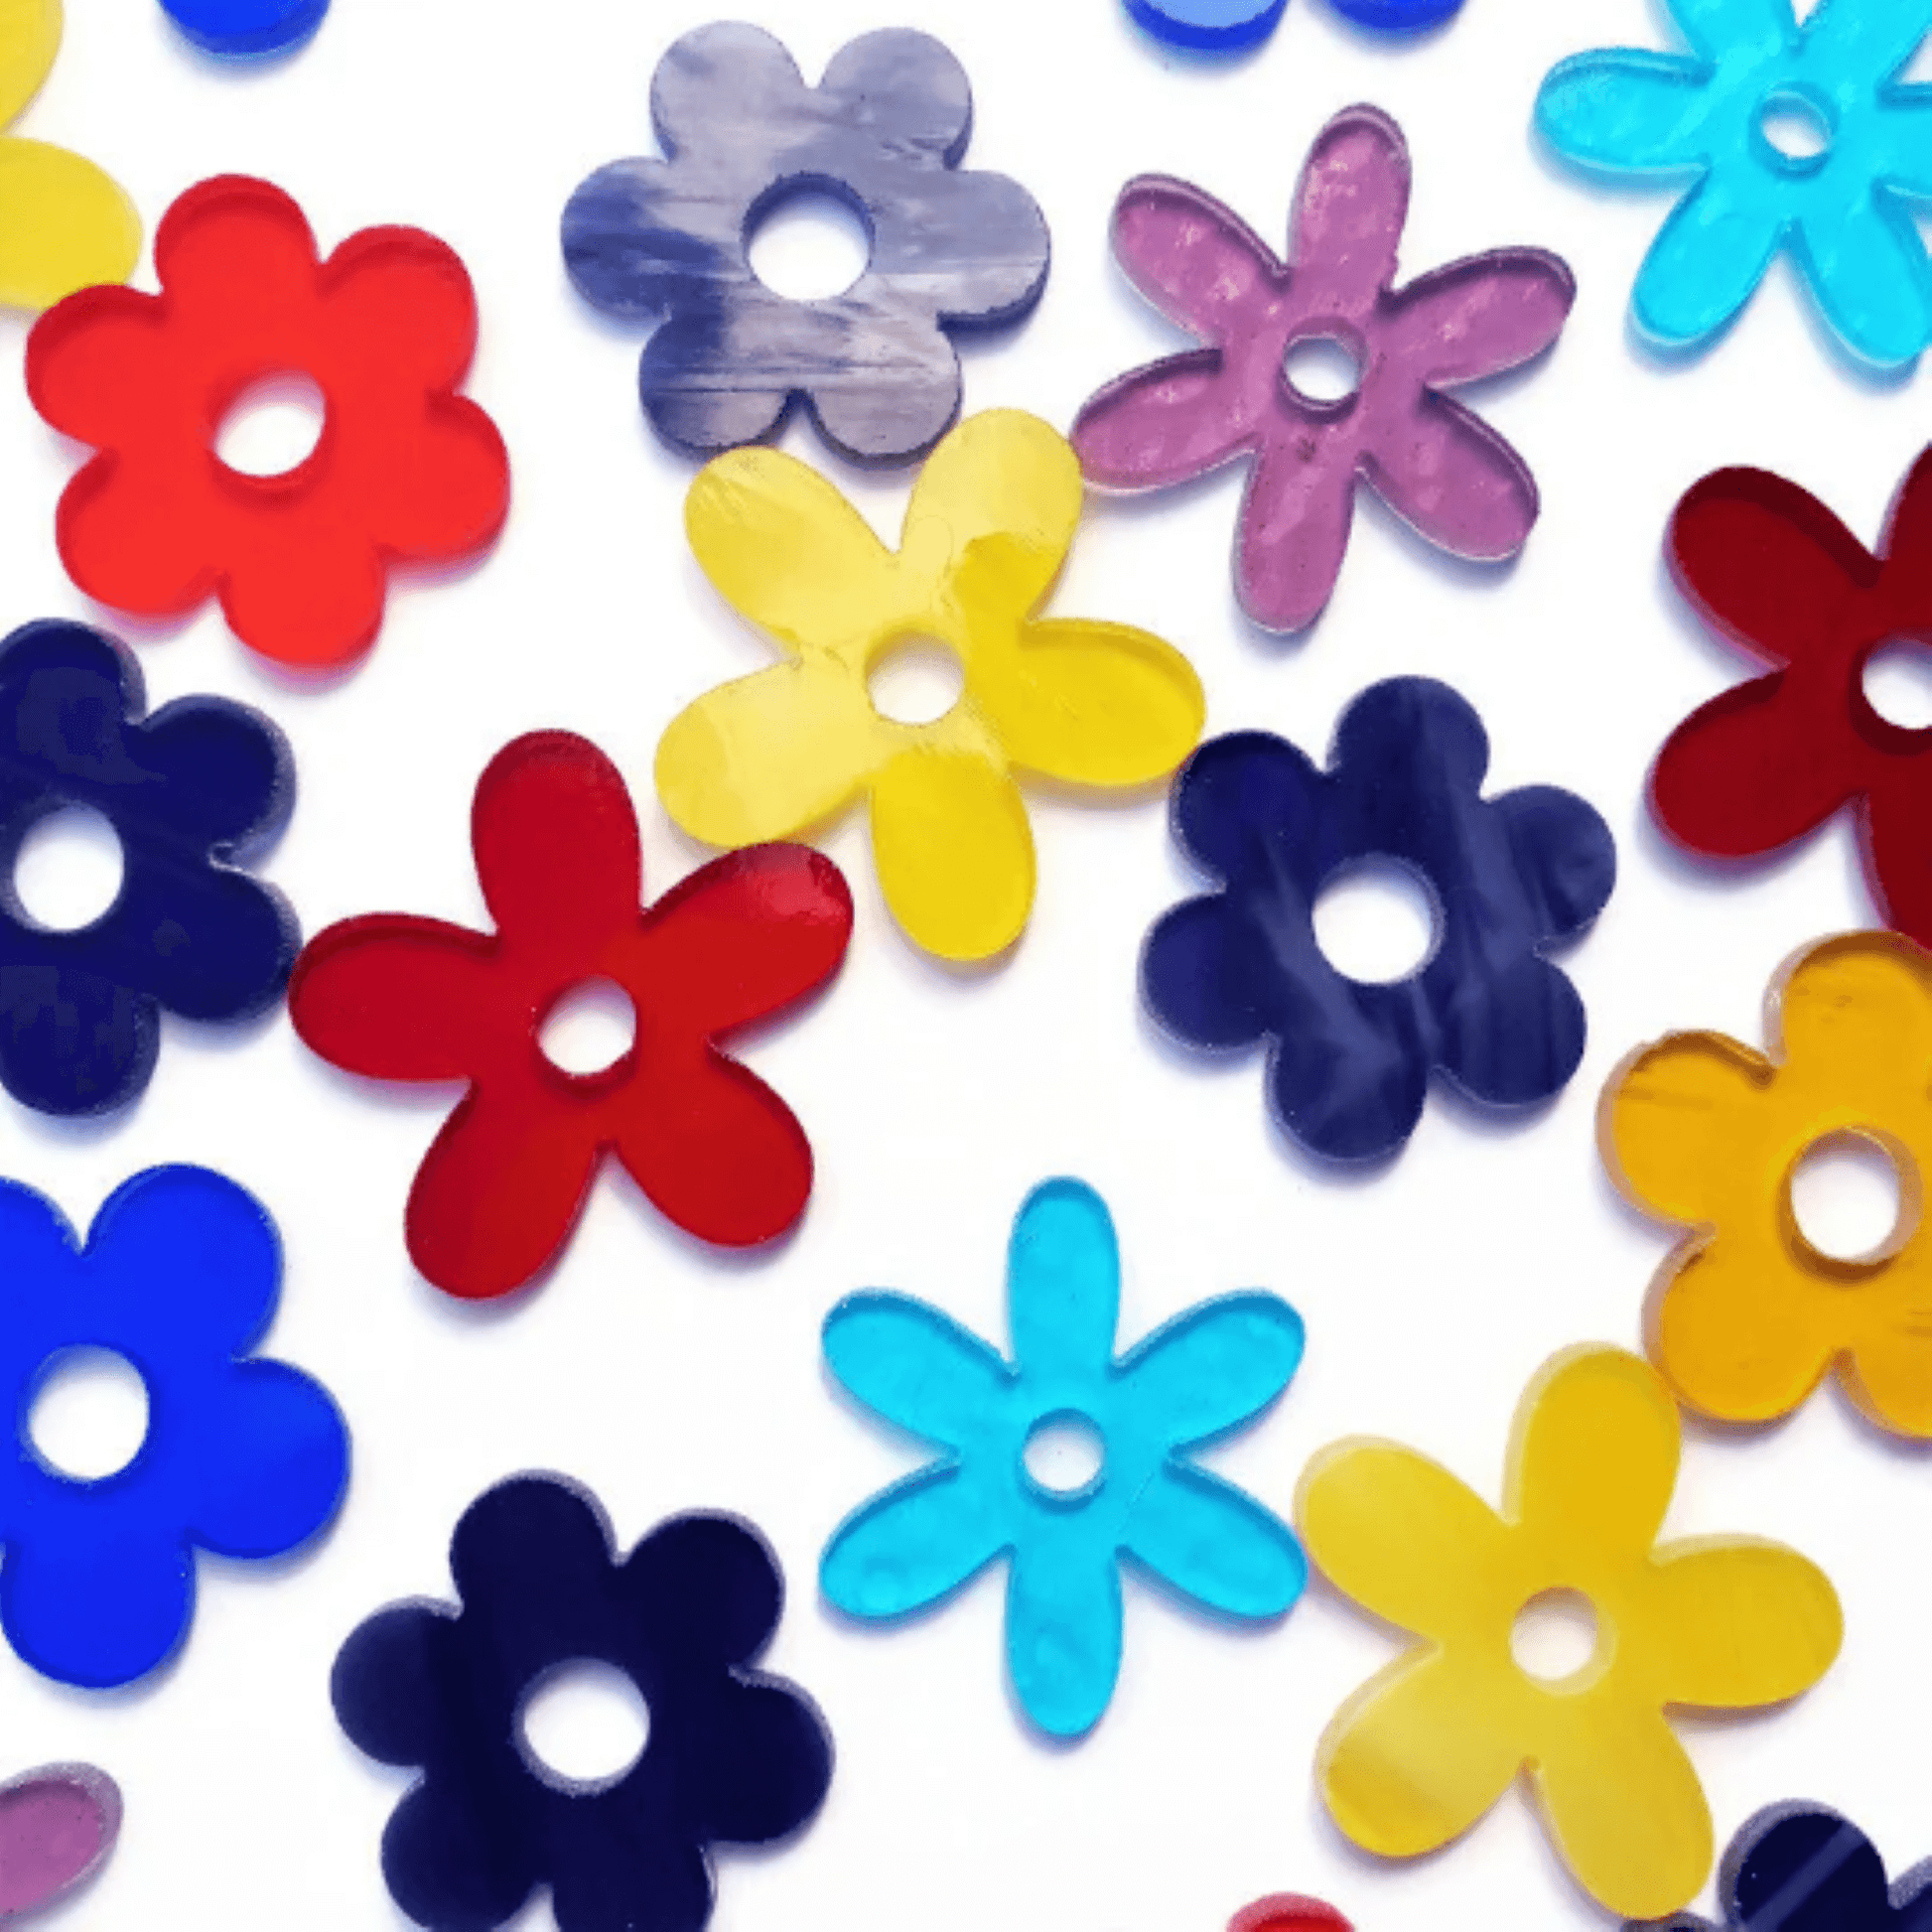 Precut Stained Glass Small Flowers, Assorted Colors, 1.5" Glass Hearts for Mosaics, Jewelry, Stained Glass cute little flowers